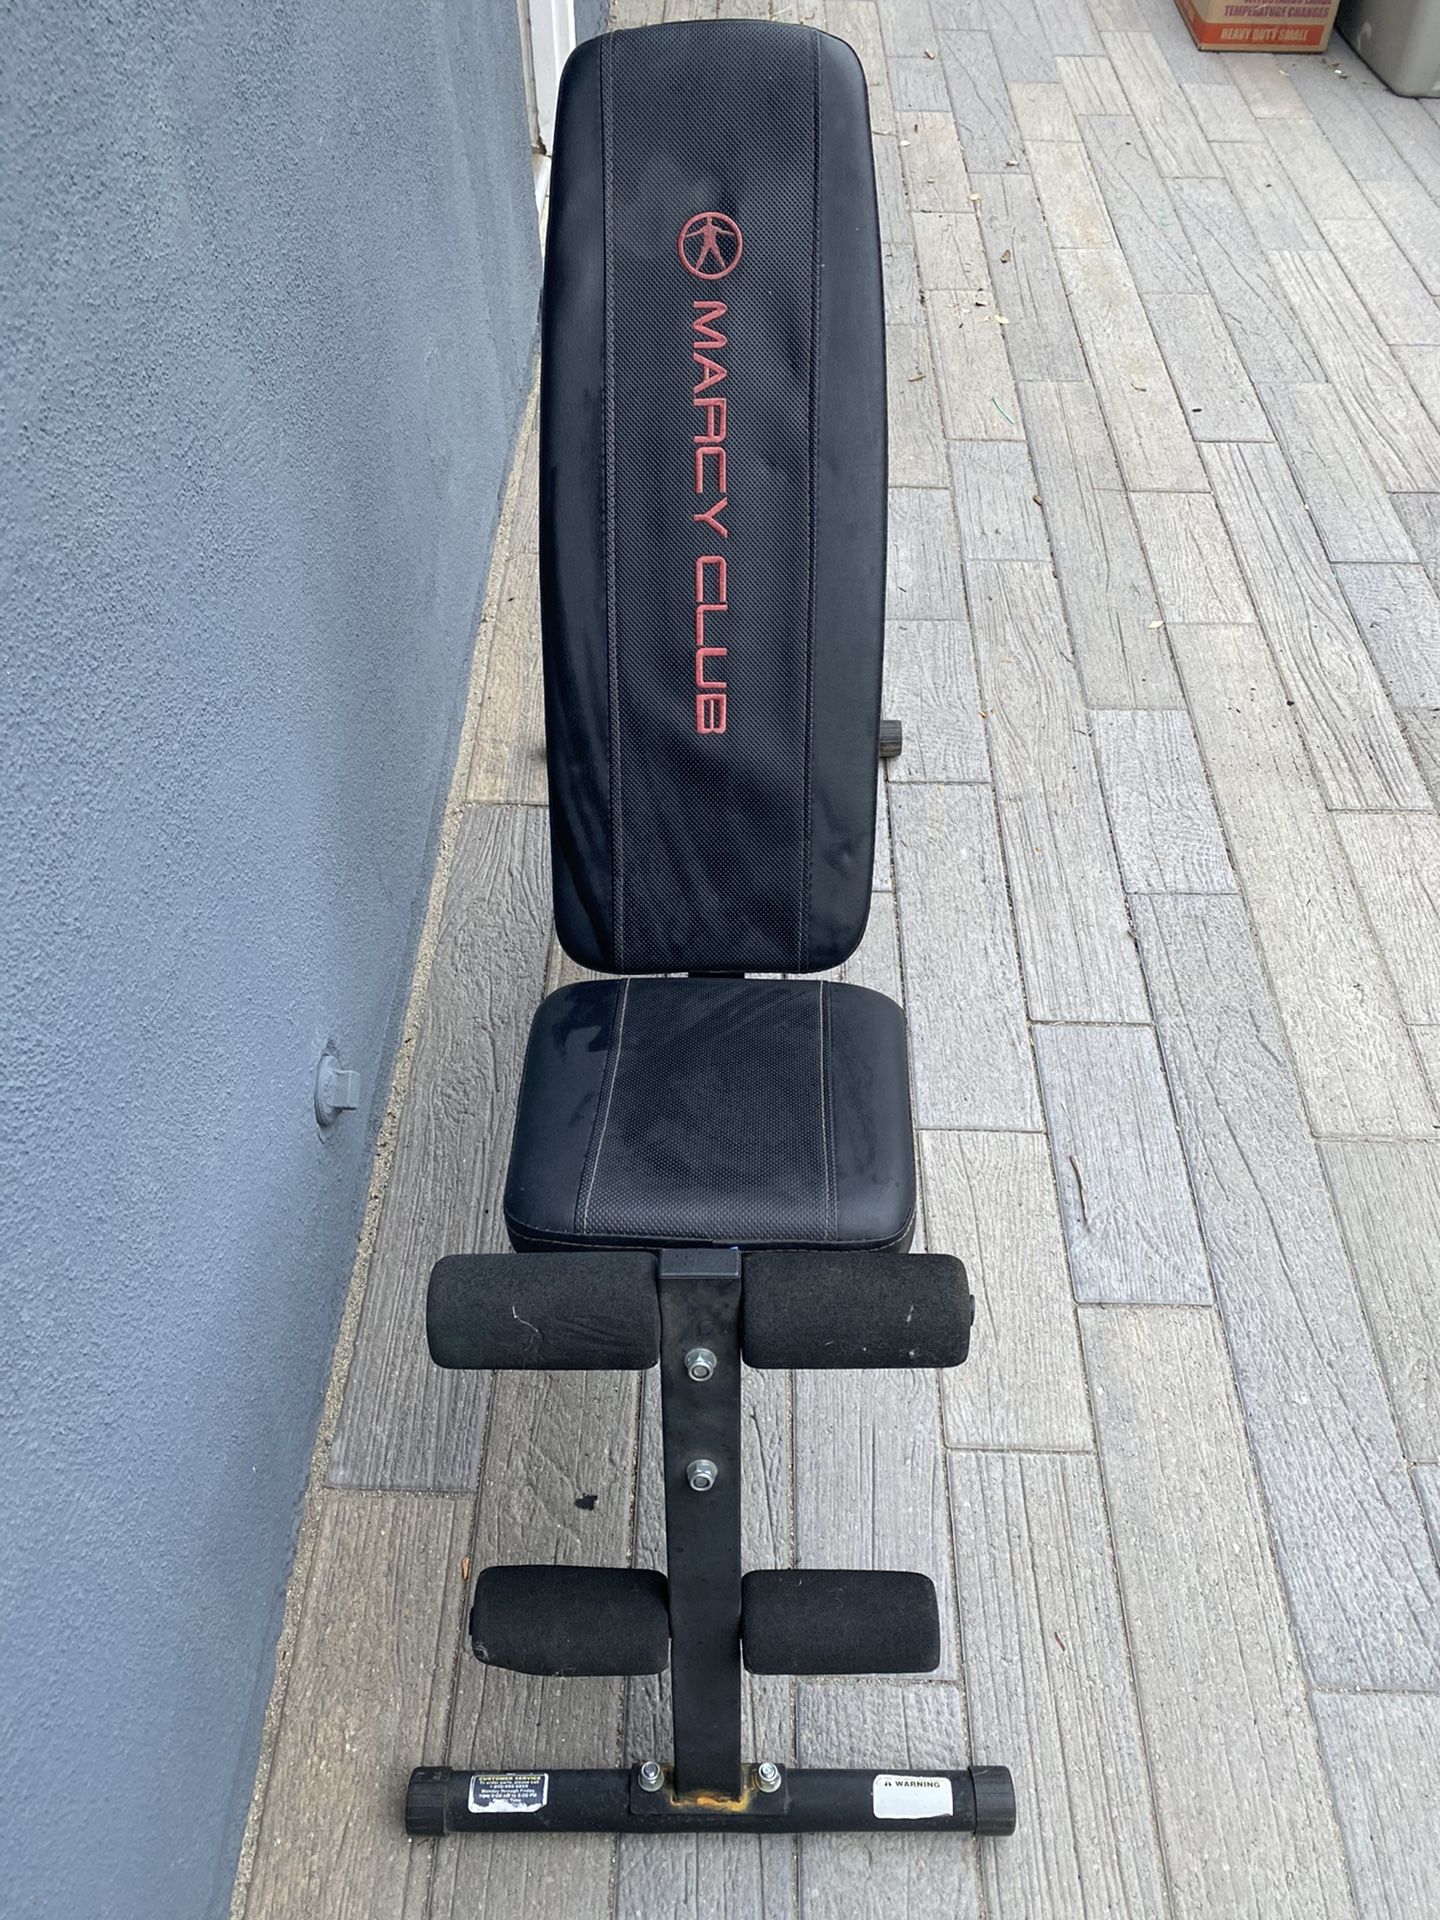 Marcy Club Workout Bench - Great Condition